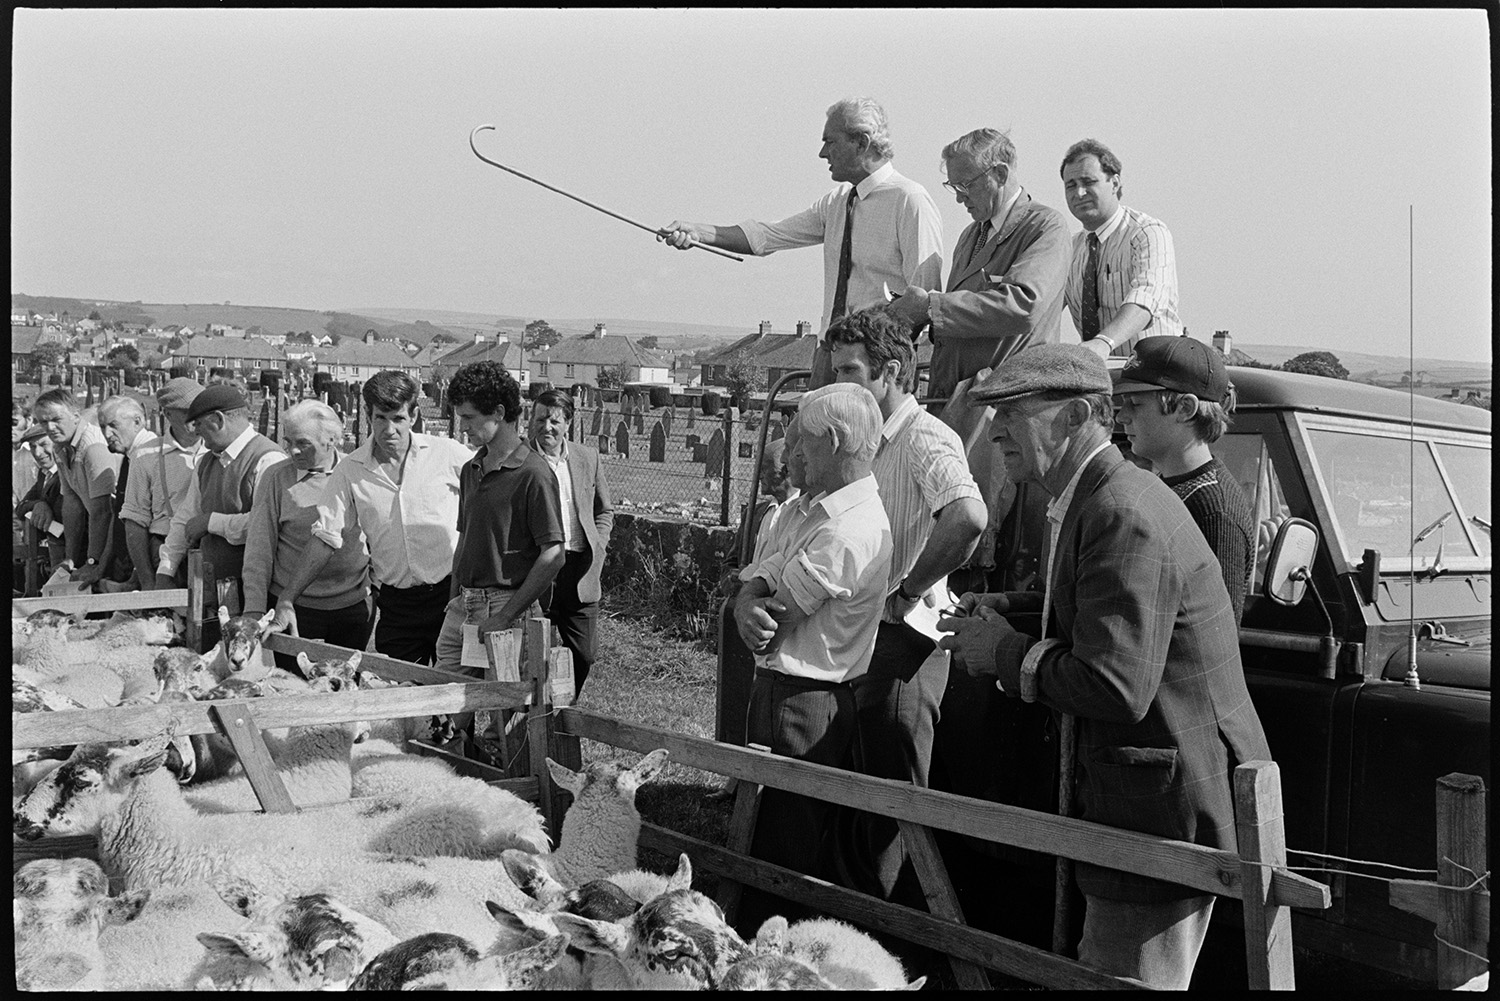 Sheep fair, farmers, auctioneers moving along pens of sheep on hot day. Overview towards town. 
[Men looking at sheep in pens at South Molton Sheep Fair. Three auctioneers are stood in the back of a Land Rover. Houses and a graveyard can be seen in the background.]